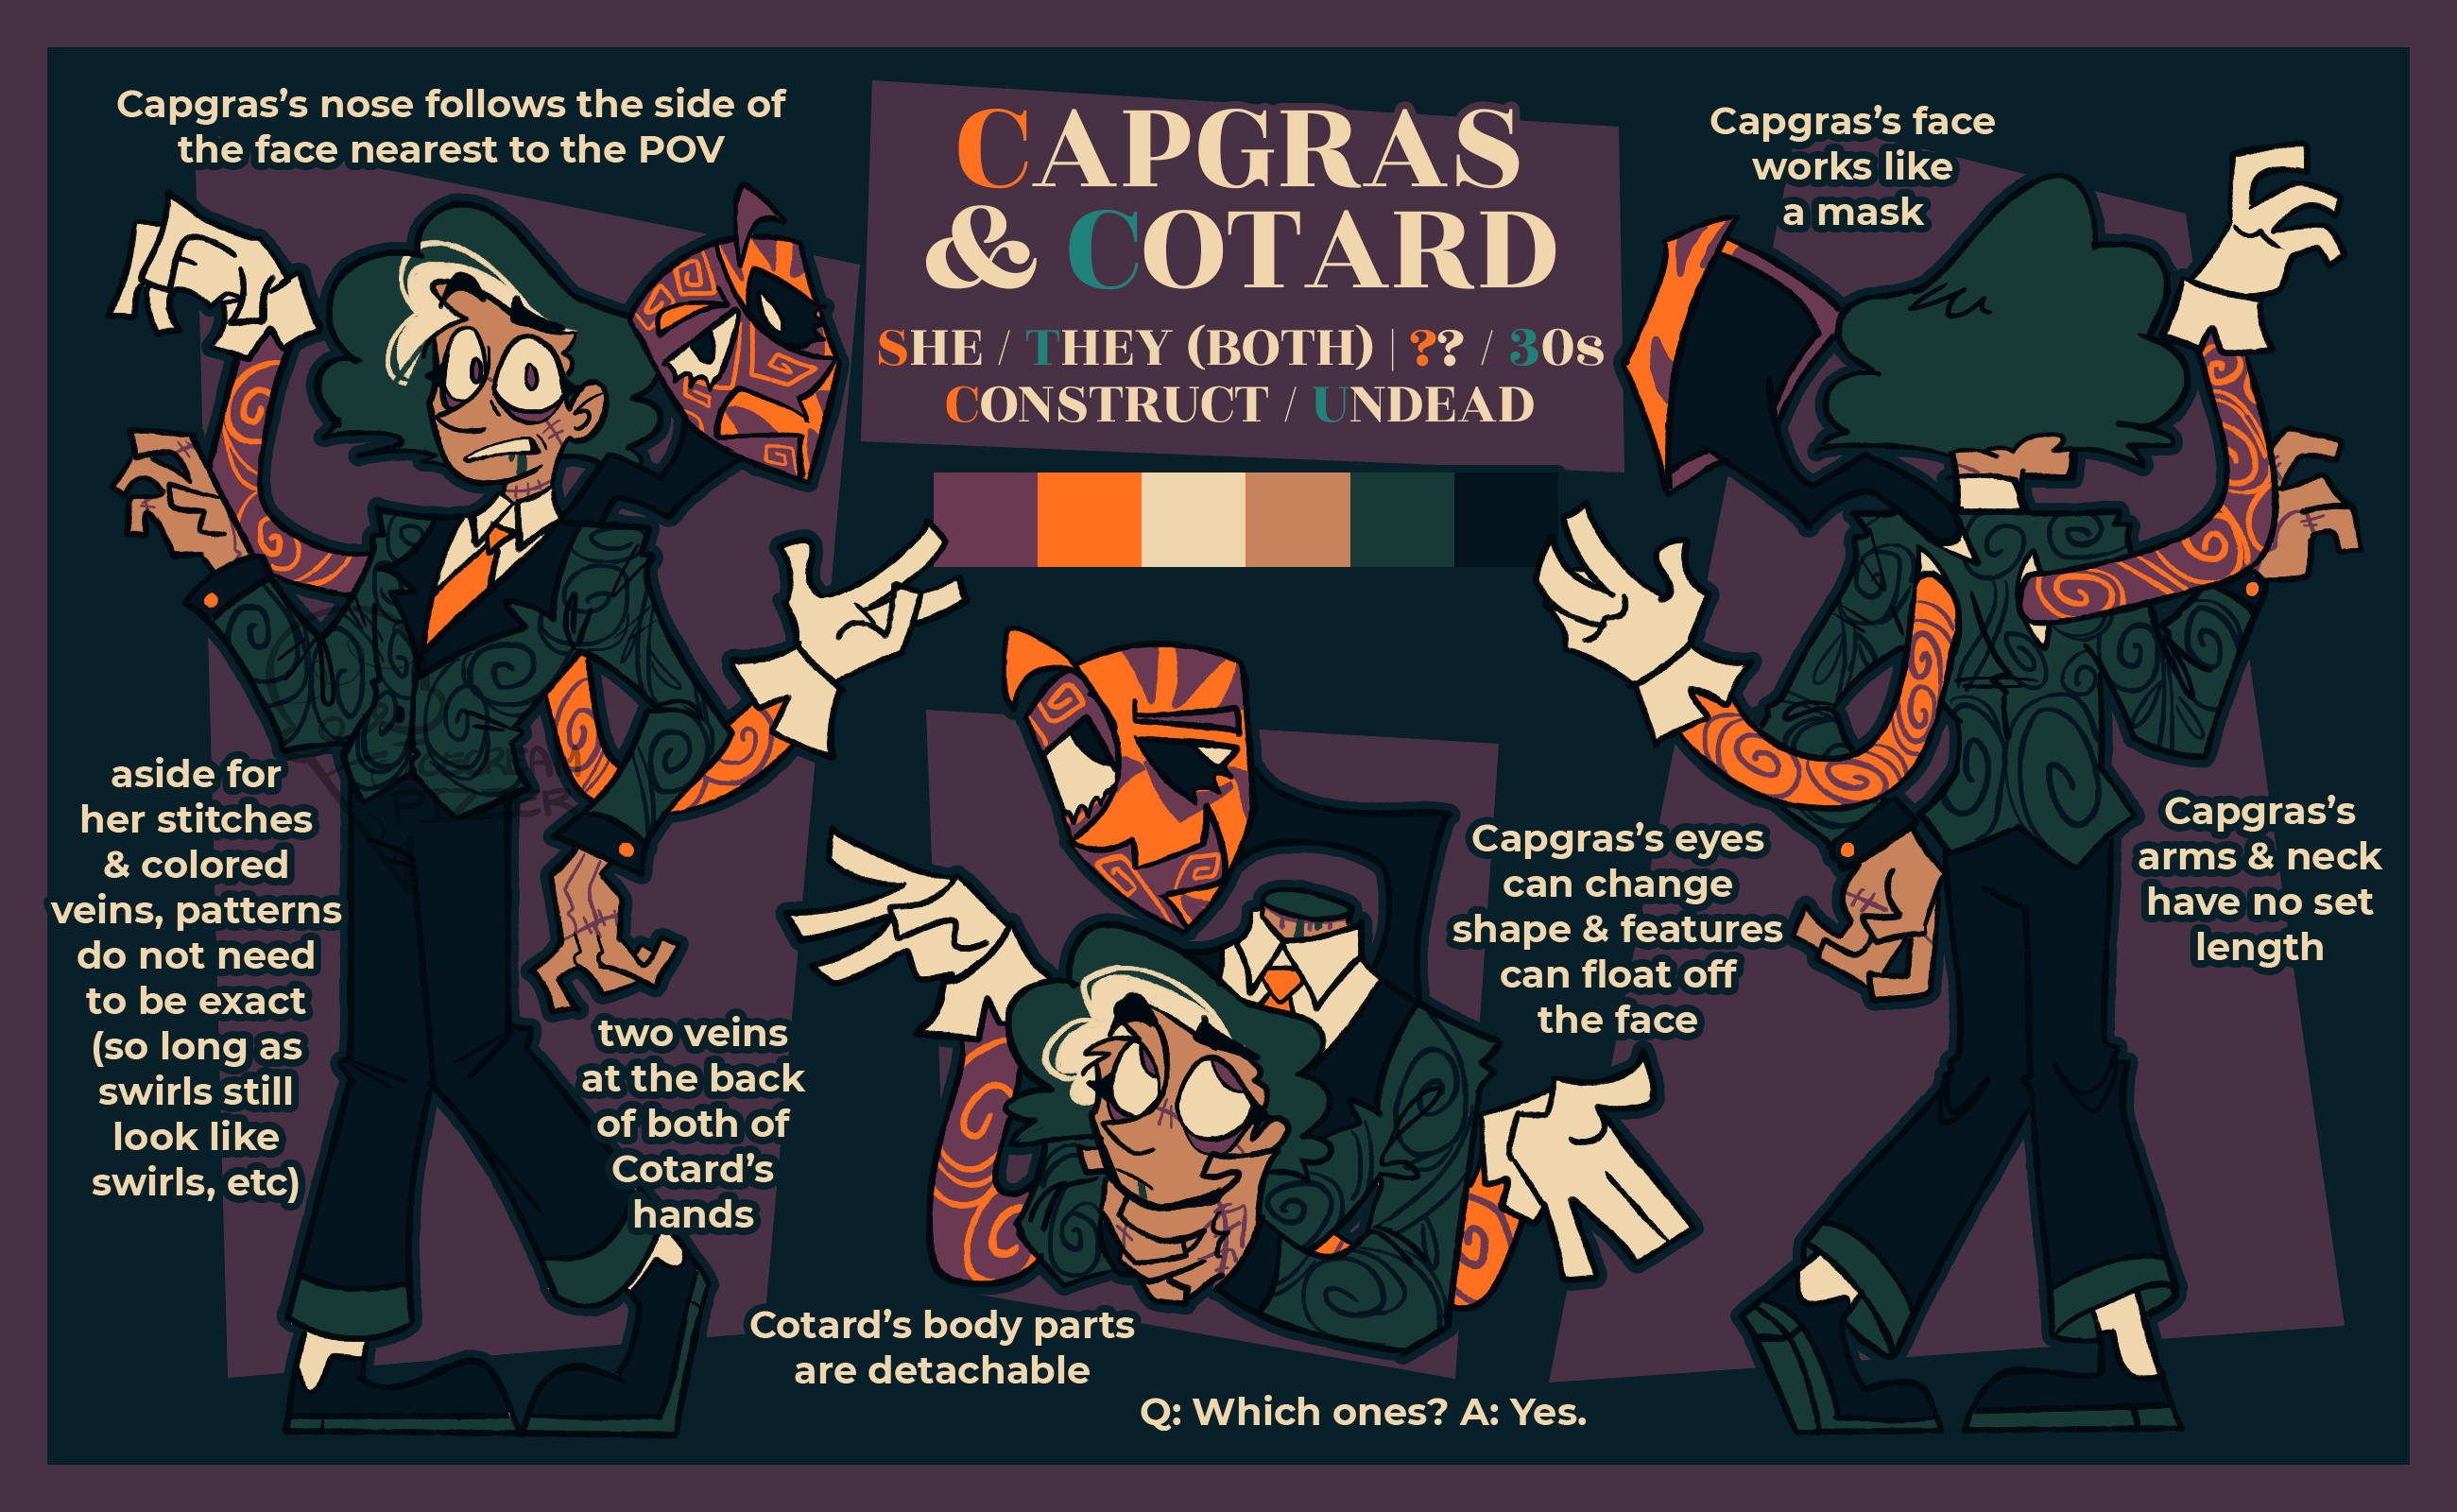 capgras and cotard reference